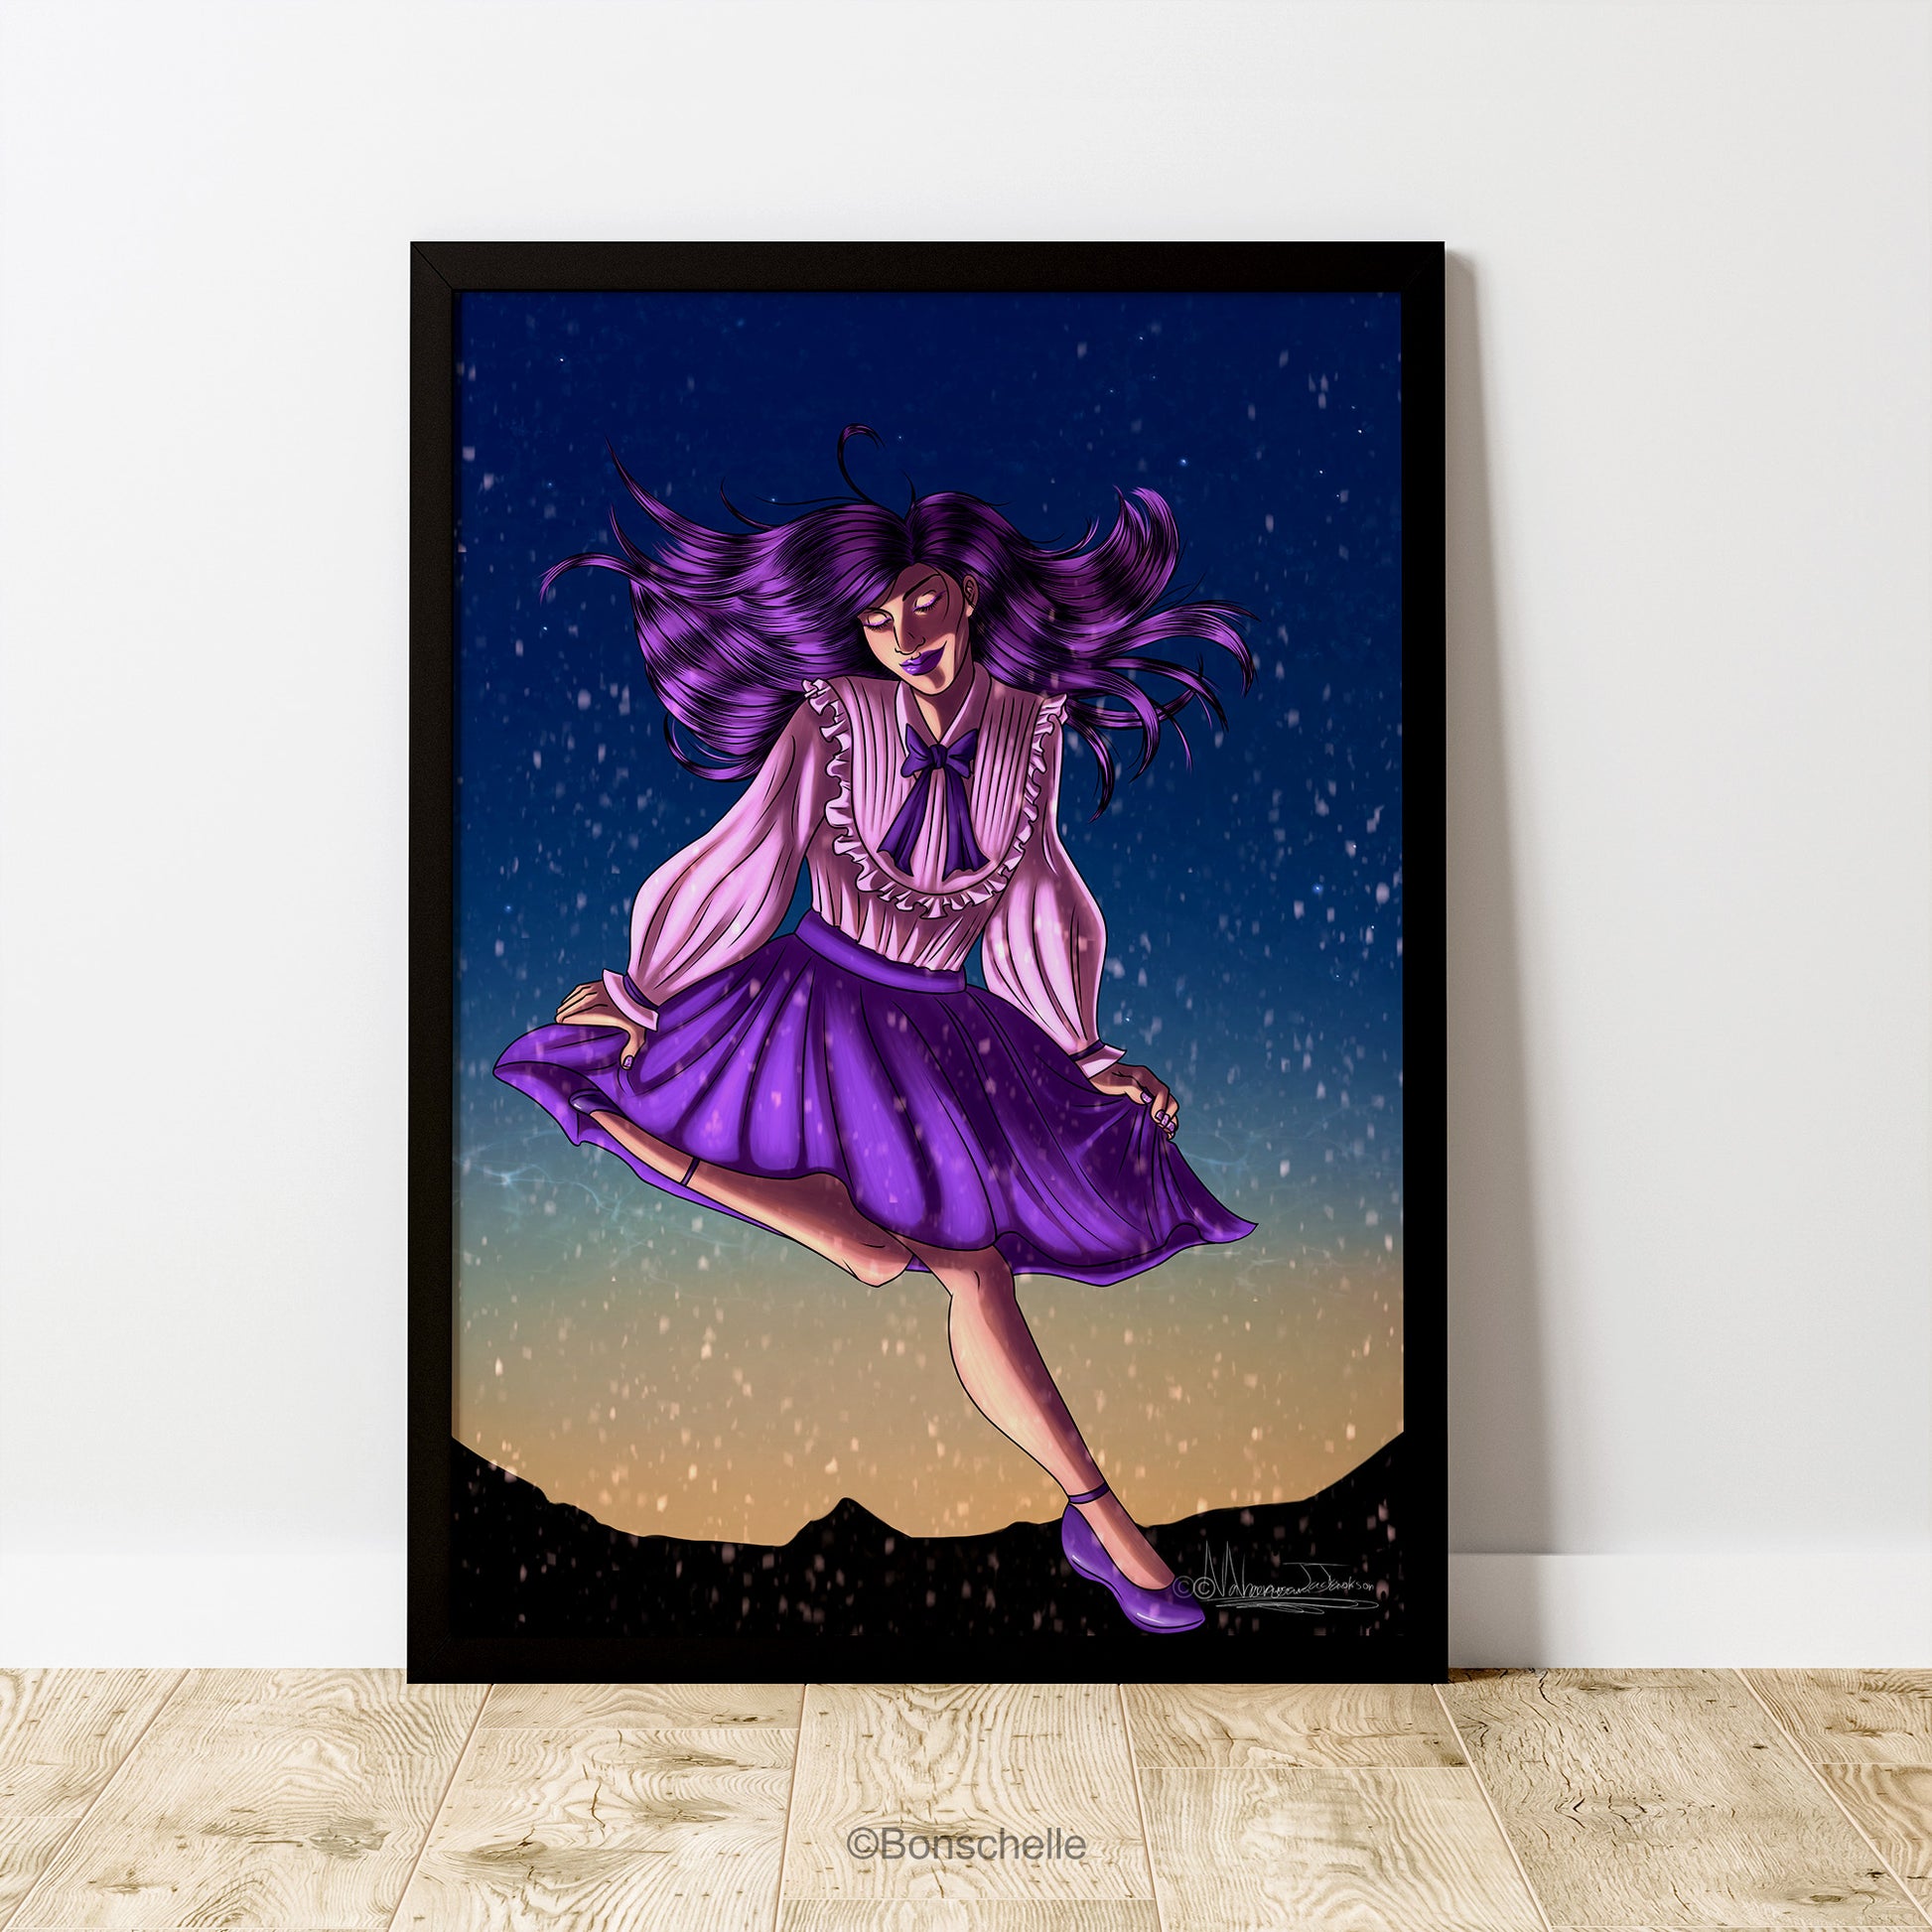 An original art print featuring a young girl in Lolita fashion dancing happily in the snow against an evening sky. The poster is framed in black, sits on a wooden floor and leans against a white wall.